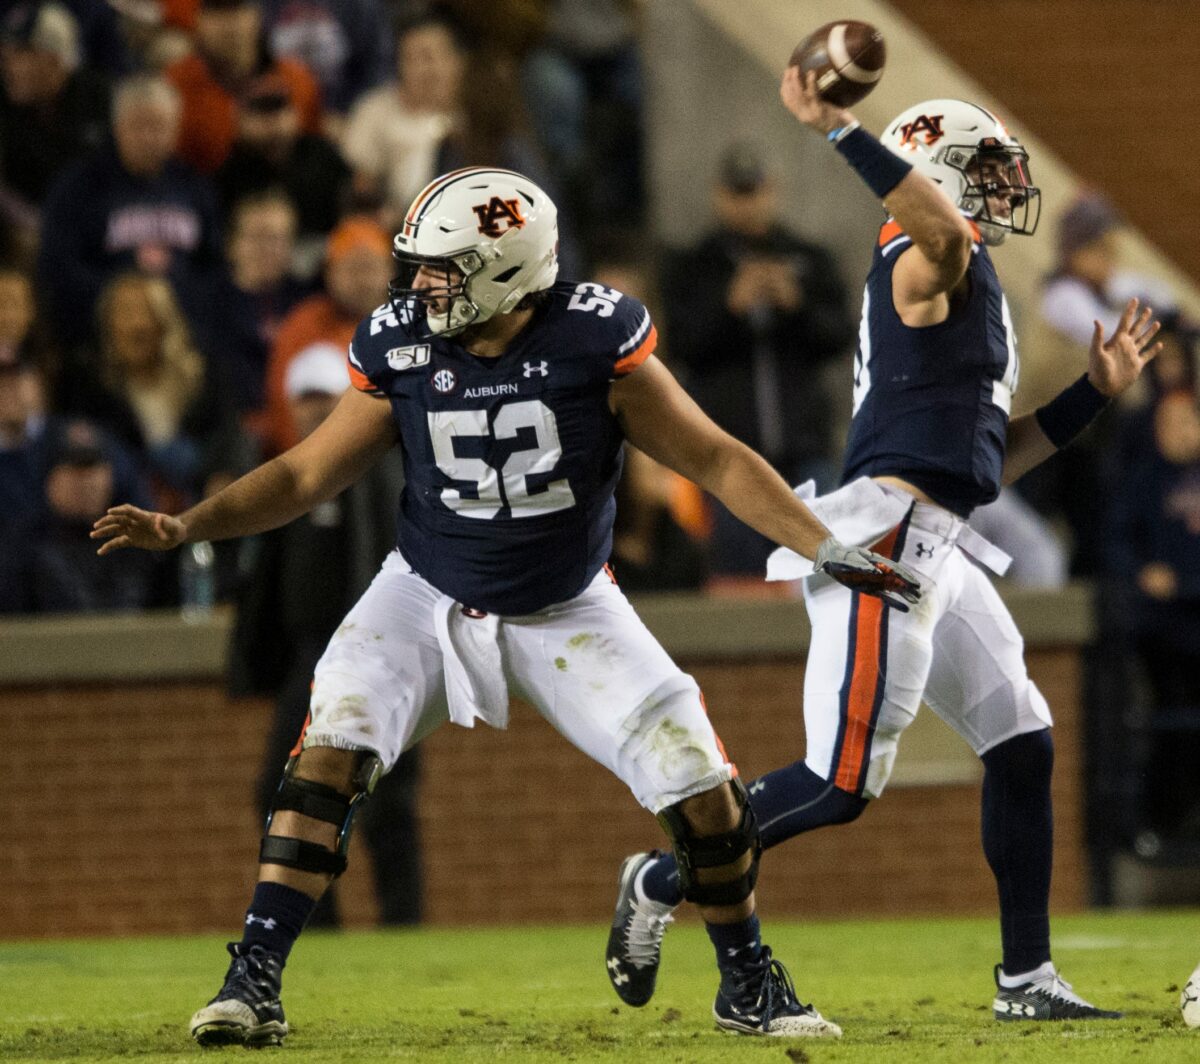 One player requests Auburn’s Board of Trustees to meet with football team